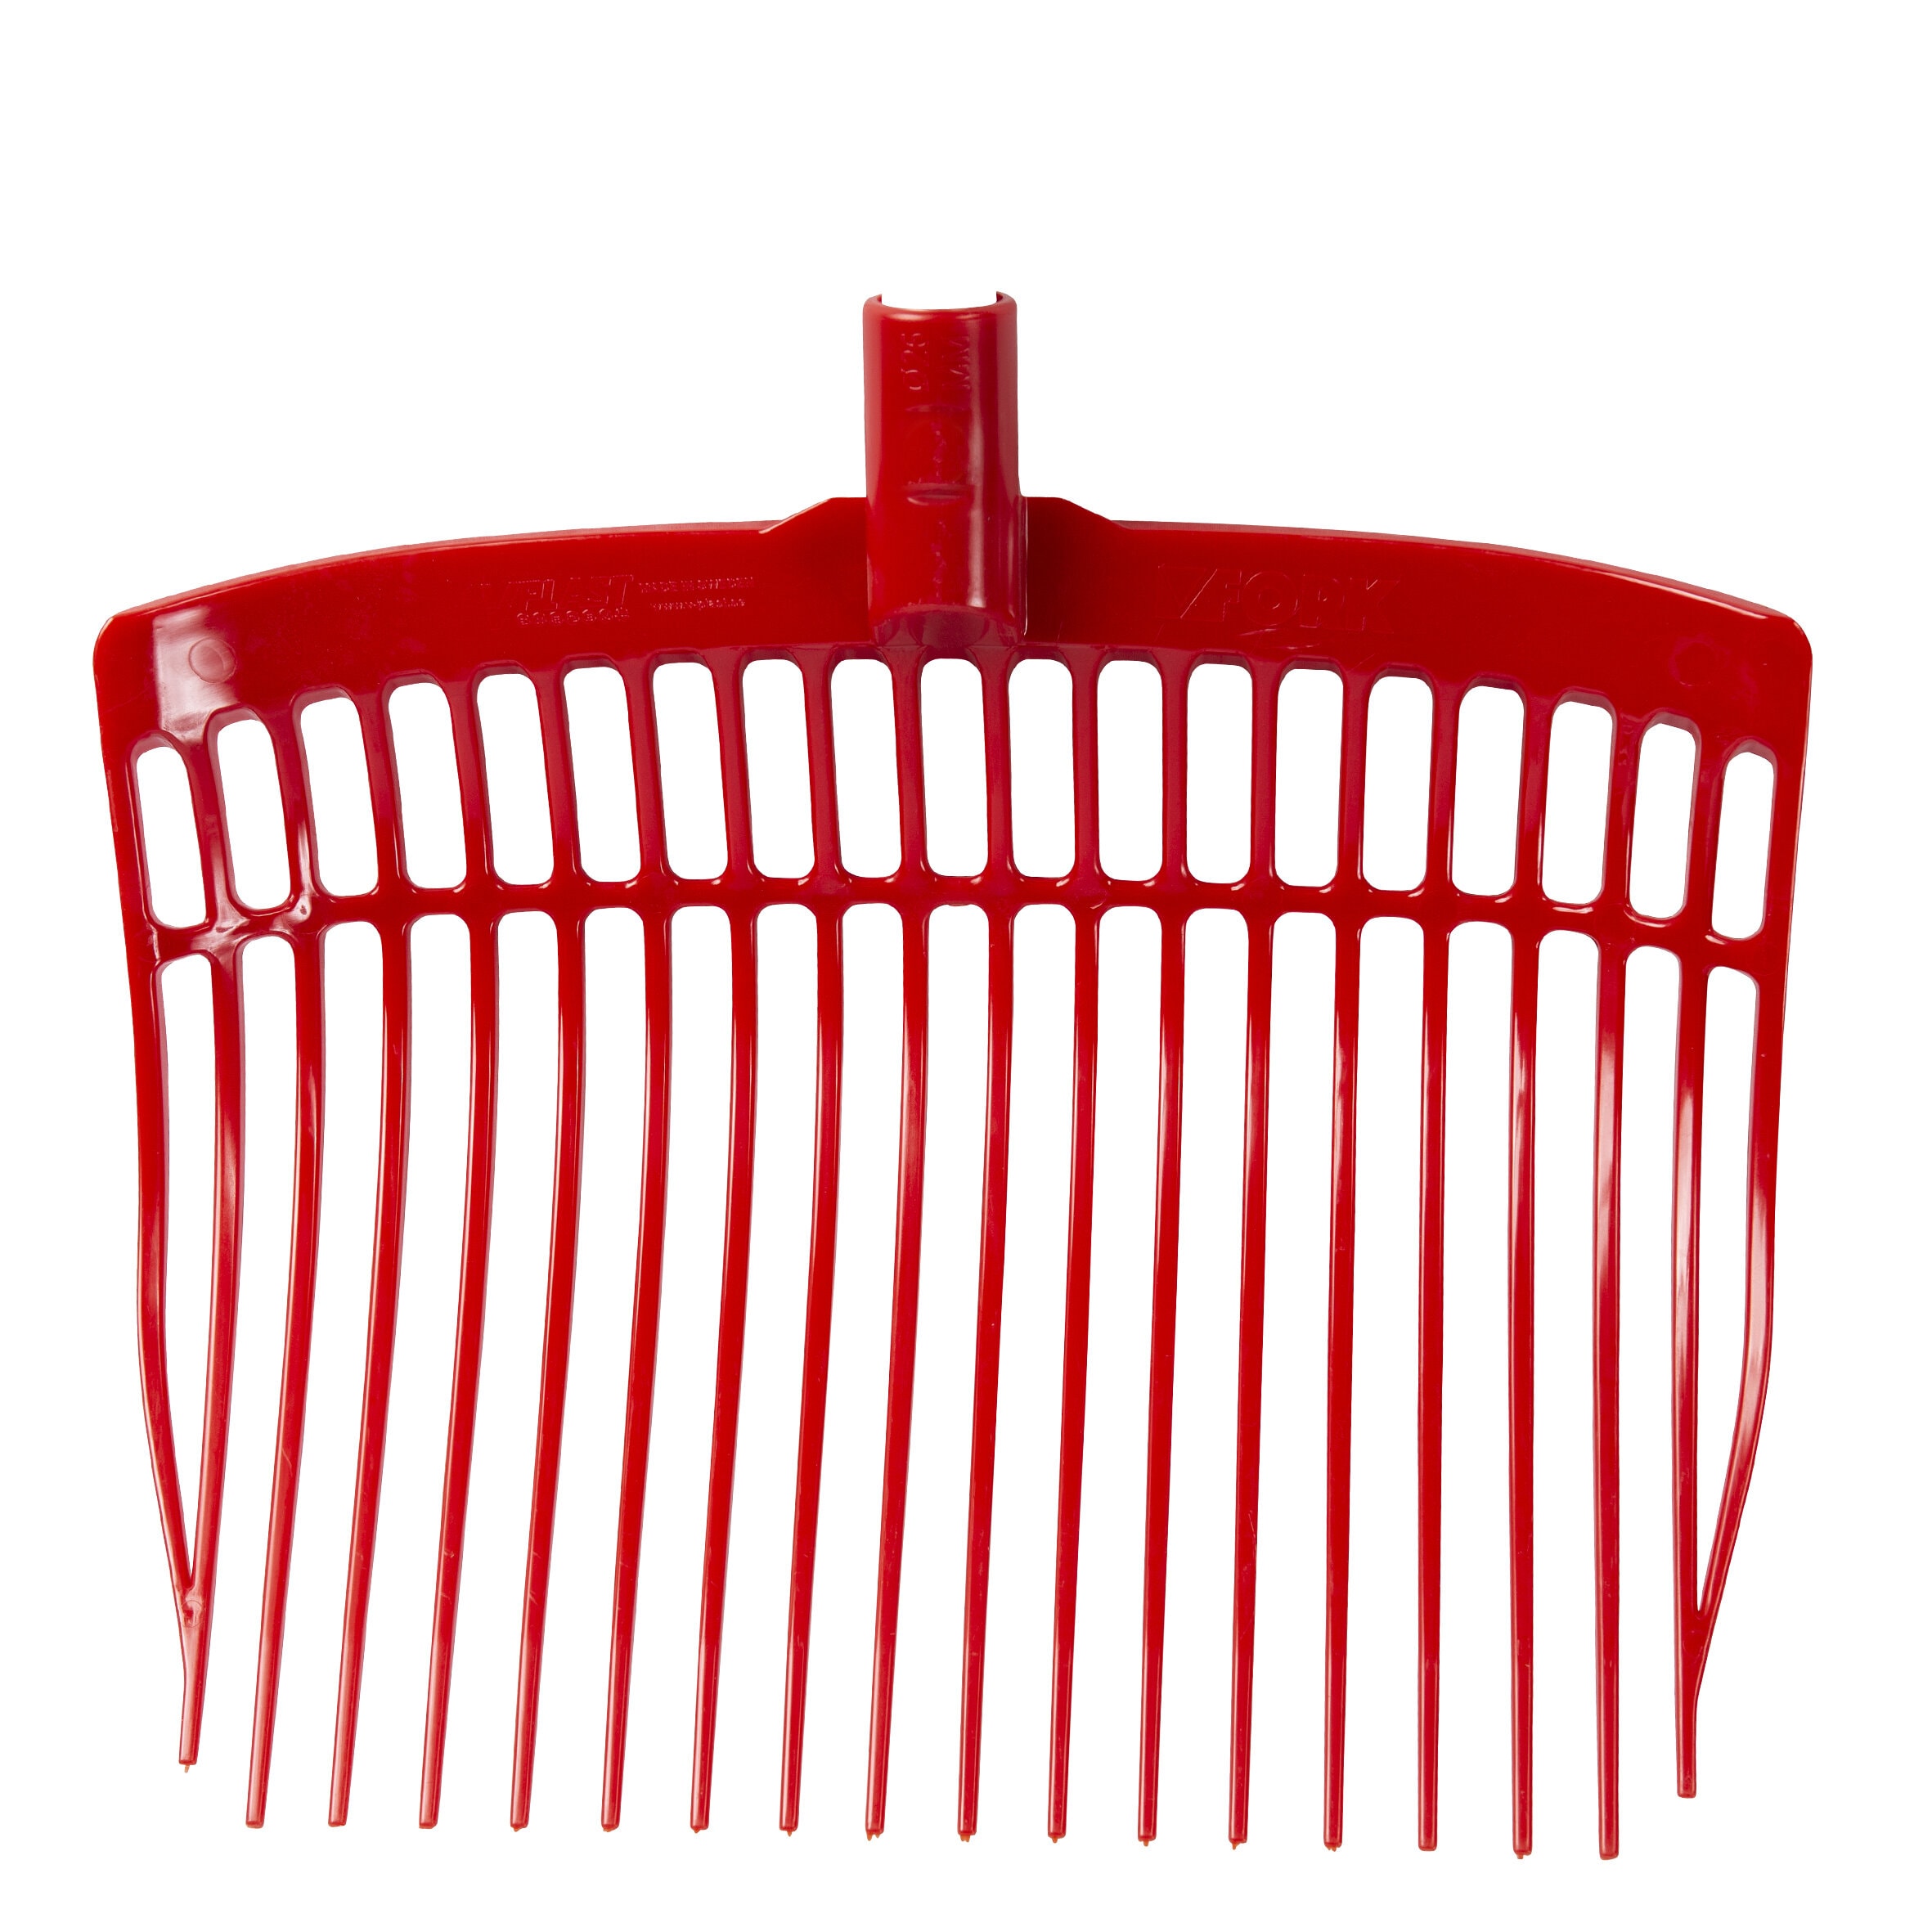 Fork head - red